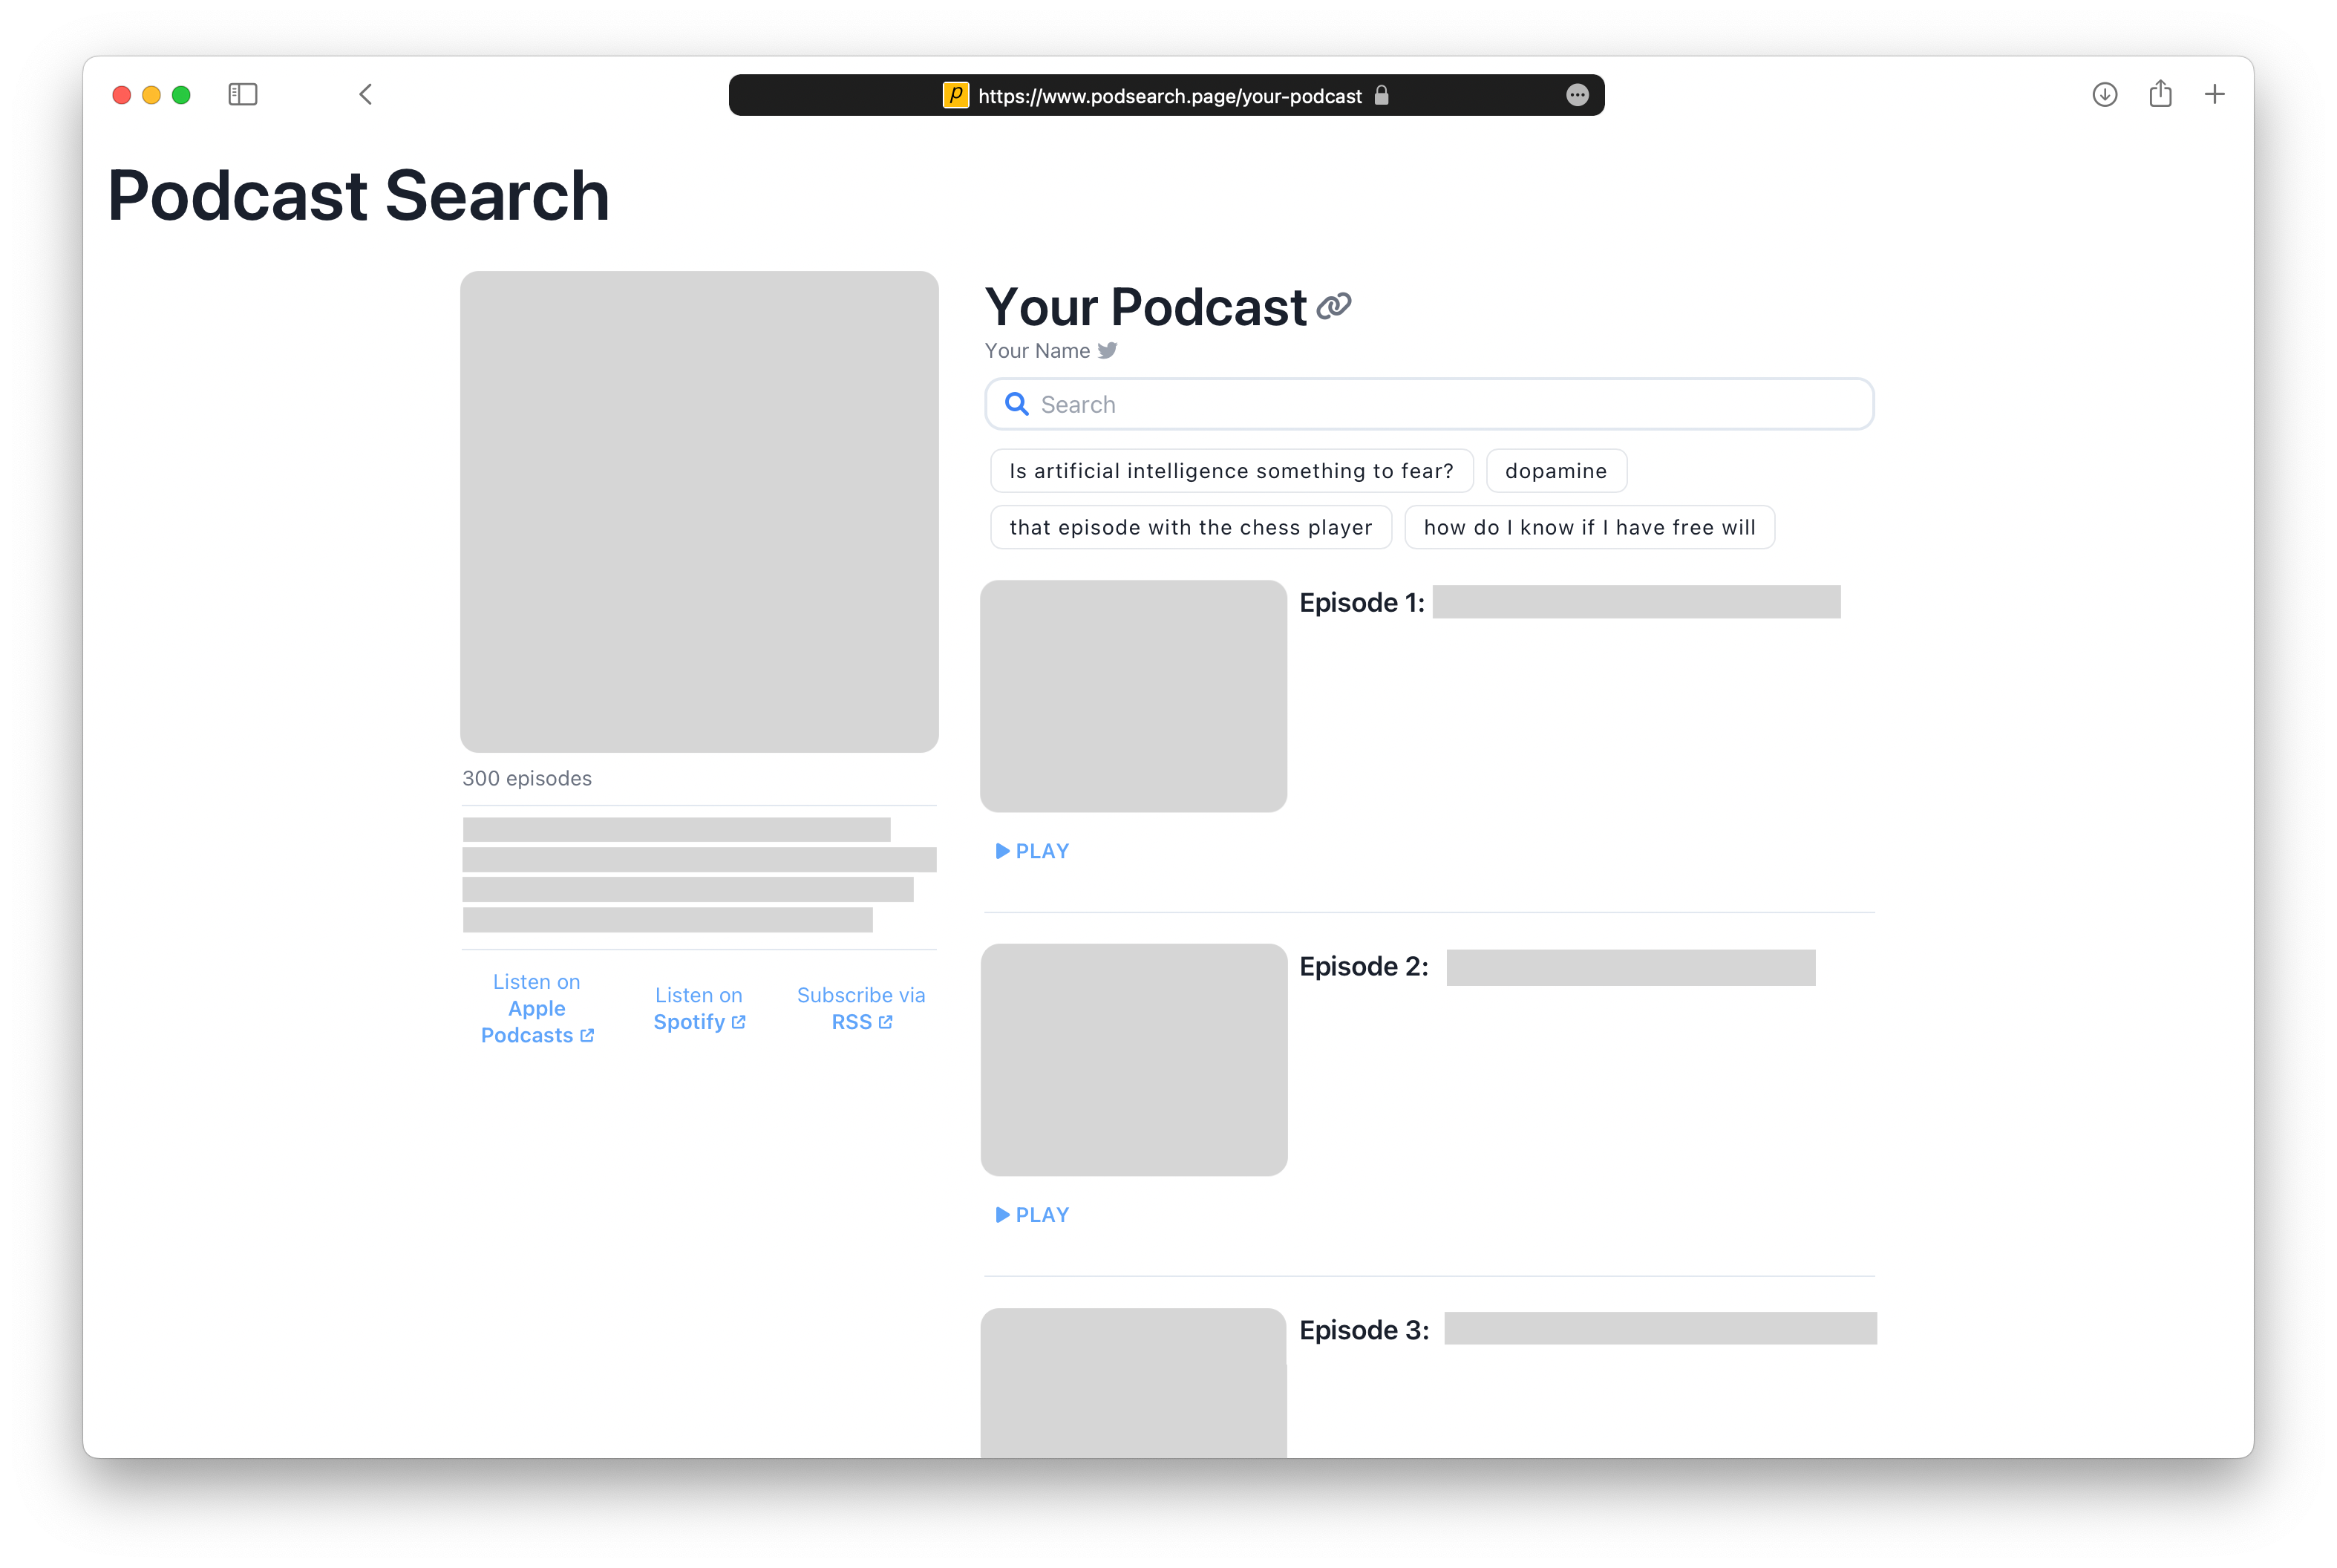 Your Podcast Search